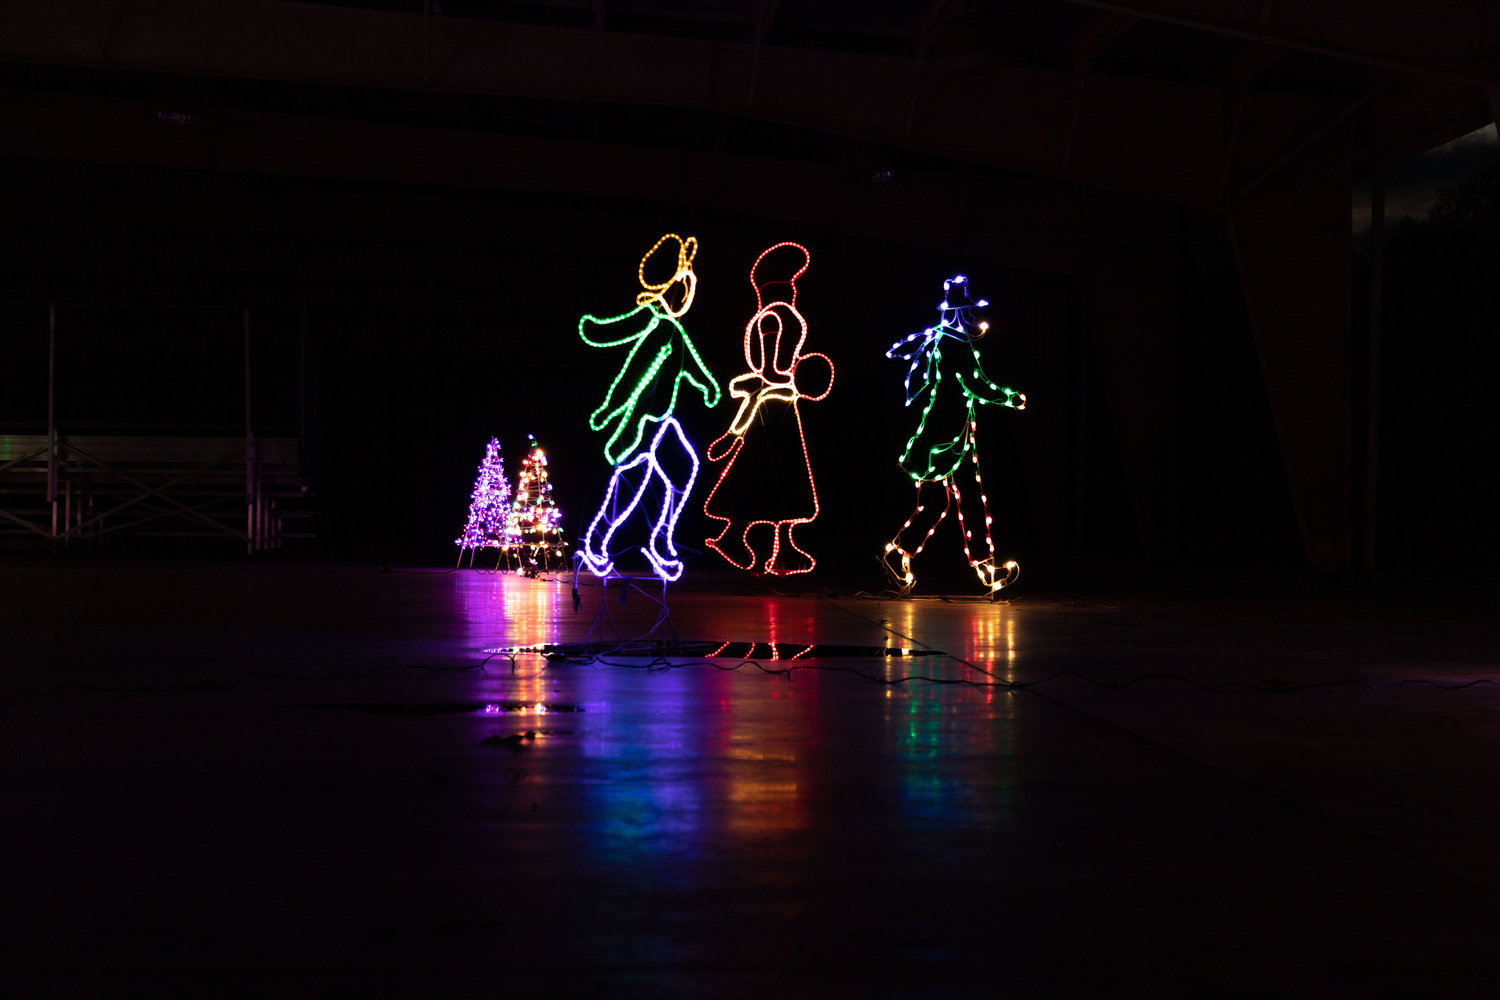 Colored lights frame ice skaters in the pavilion at Rothwell Park. Altrusa International’s annual Christmas in the Park opened this weekend and continues from 5-9 p.m. nightly through Dec. 23.